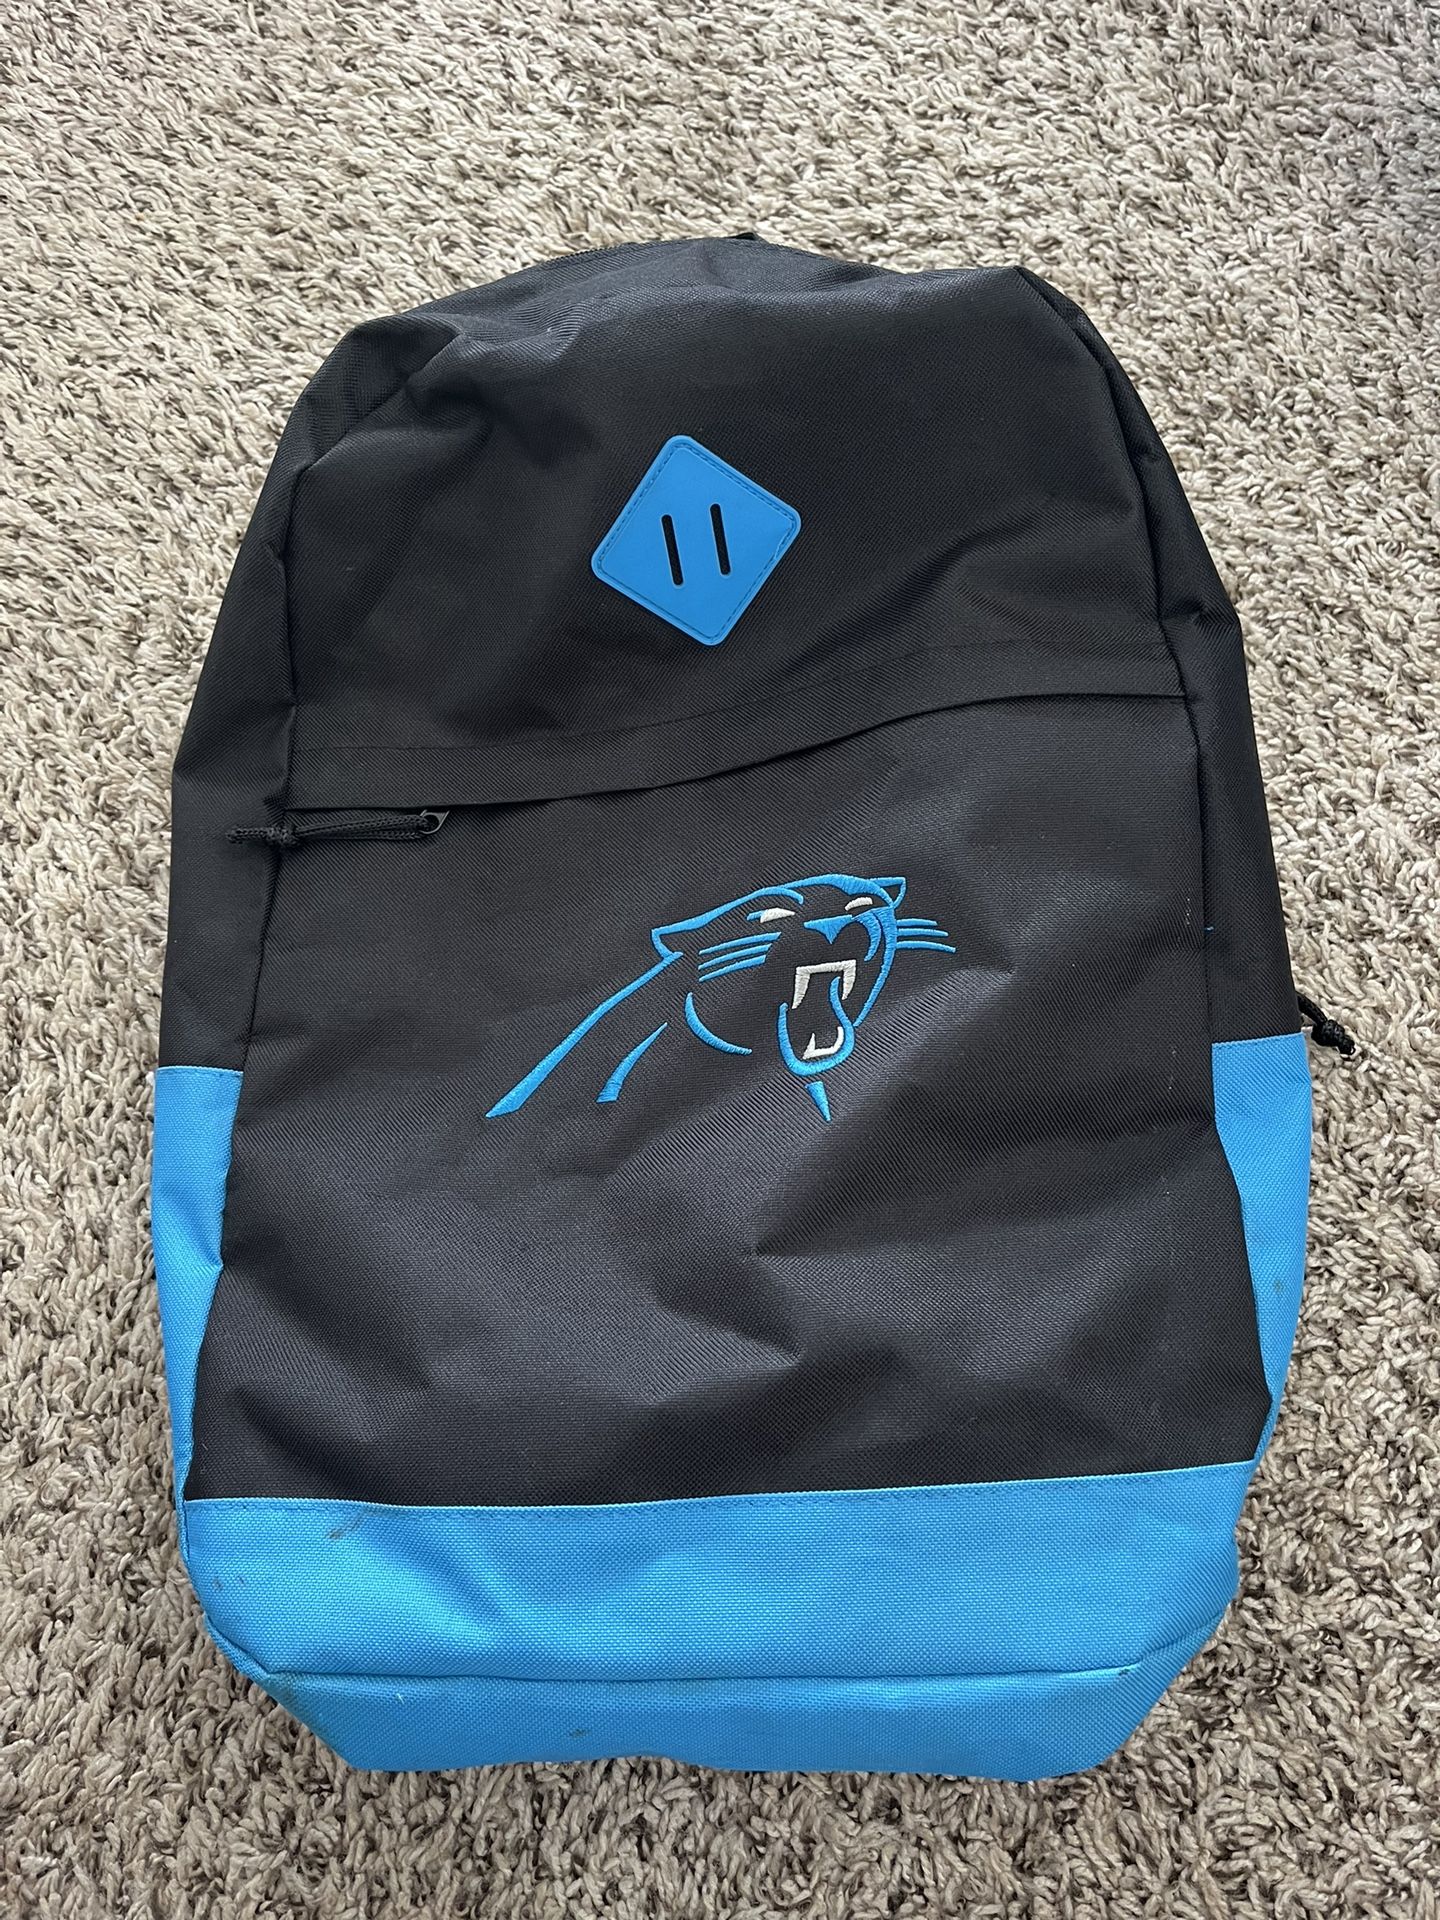 Panthers backpack